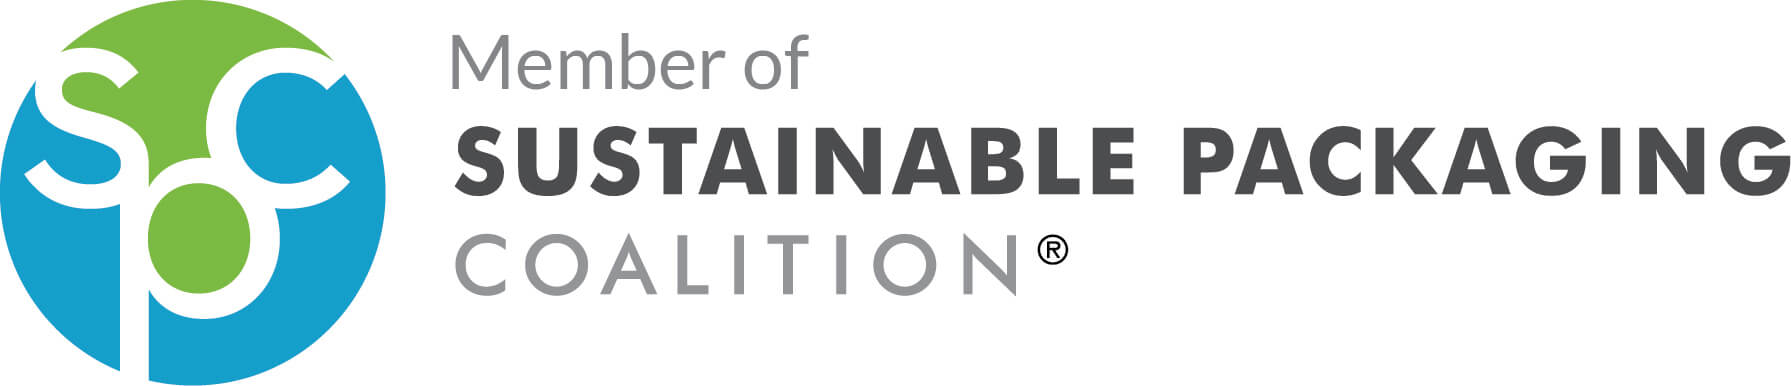 Profol Joins Sustainable Packaging Coalition (SPC)